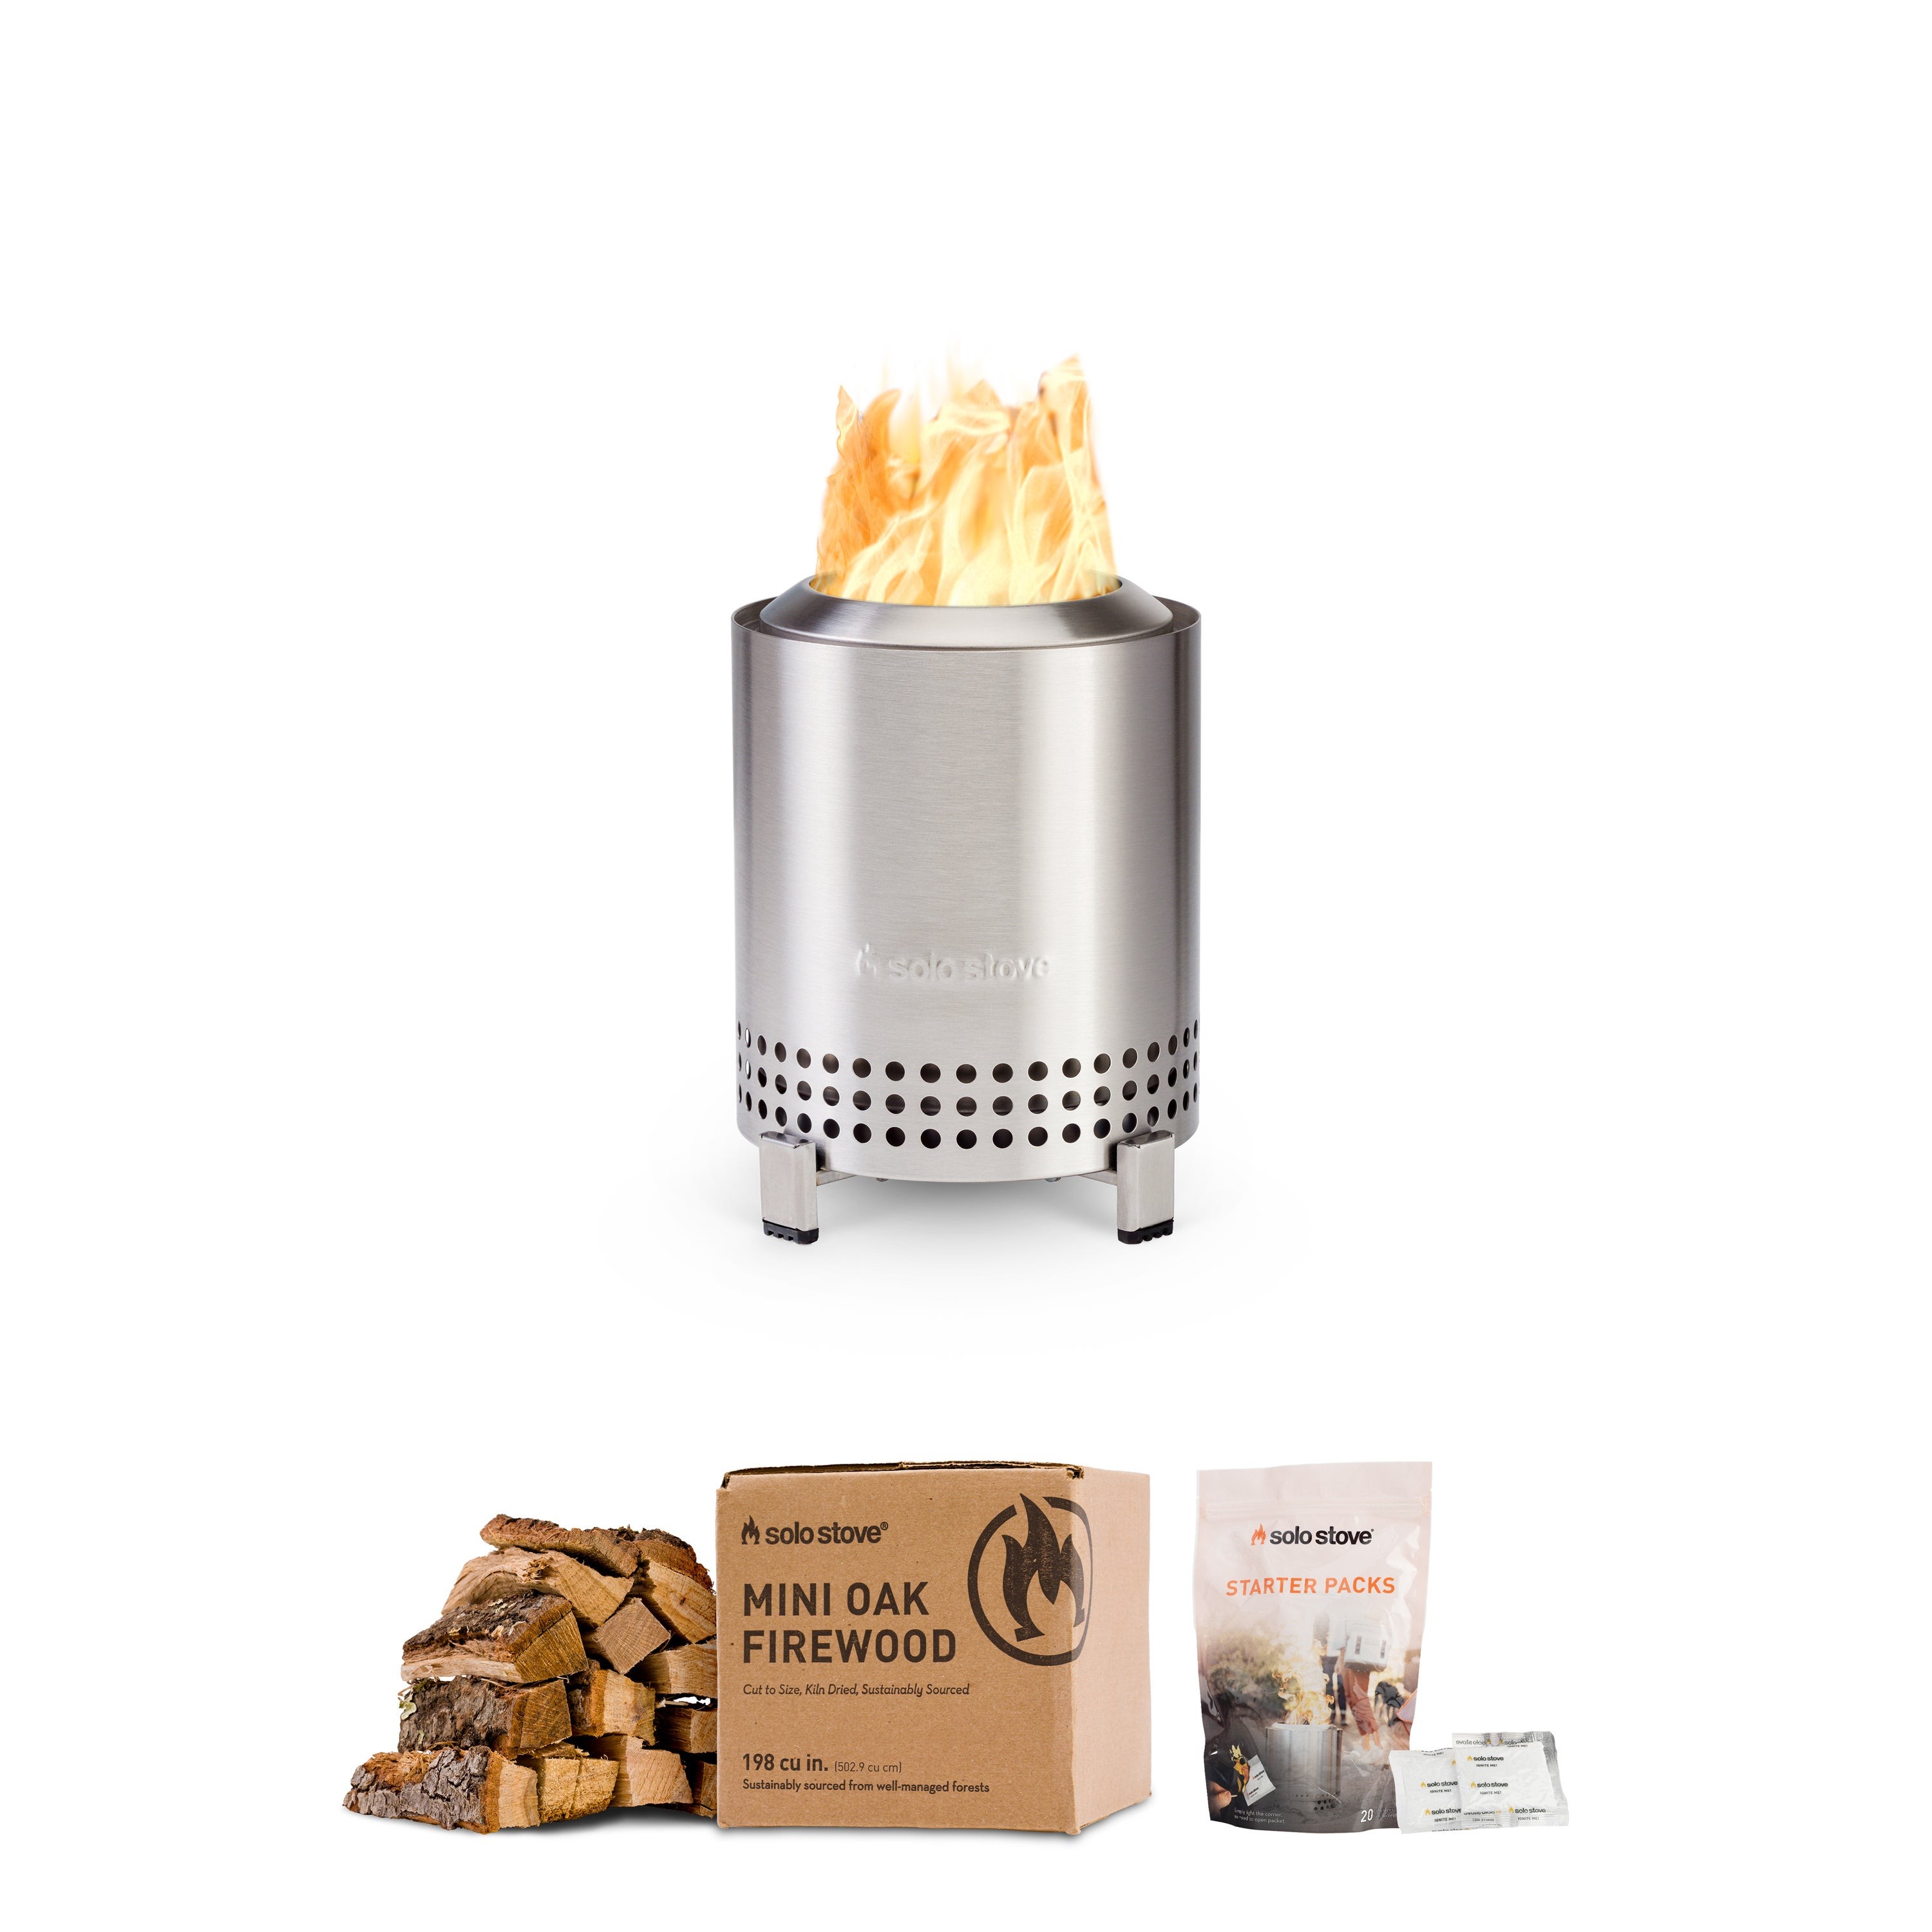 Mesa Tabletop Pit + Box of Mini Wood + Starter Pack Stainless